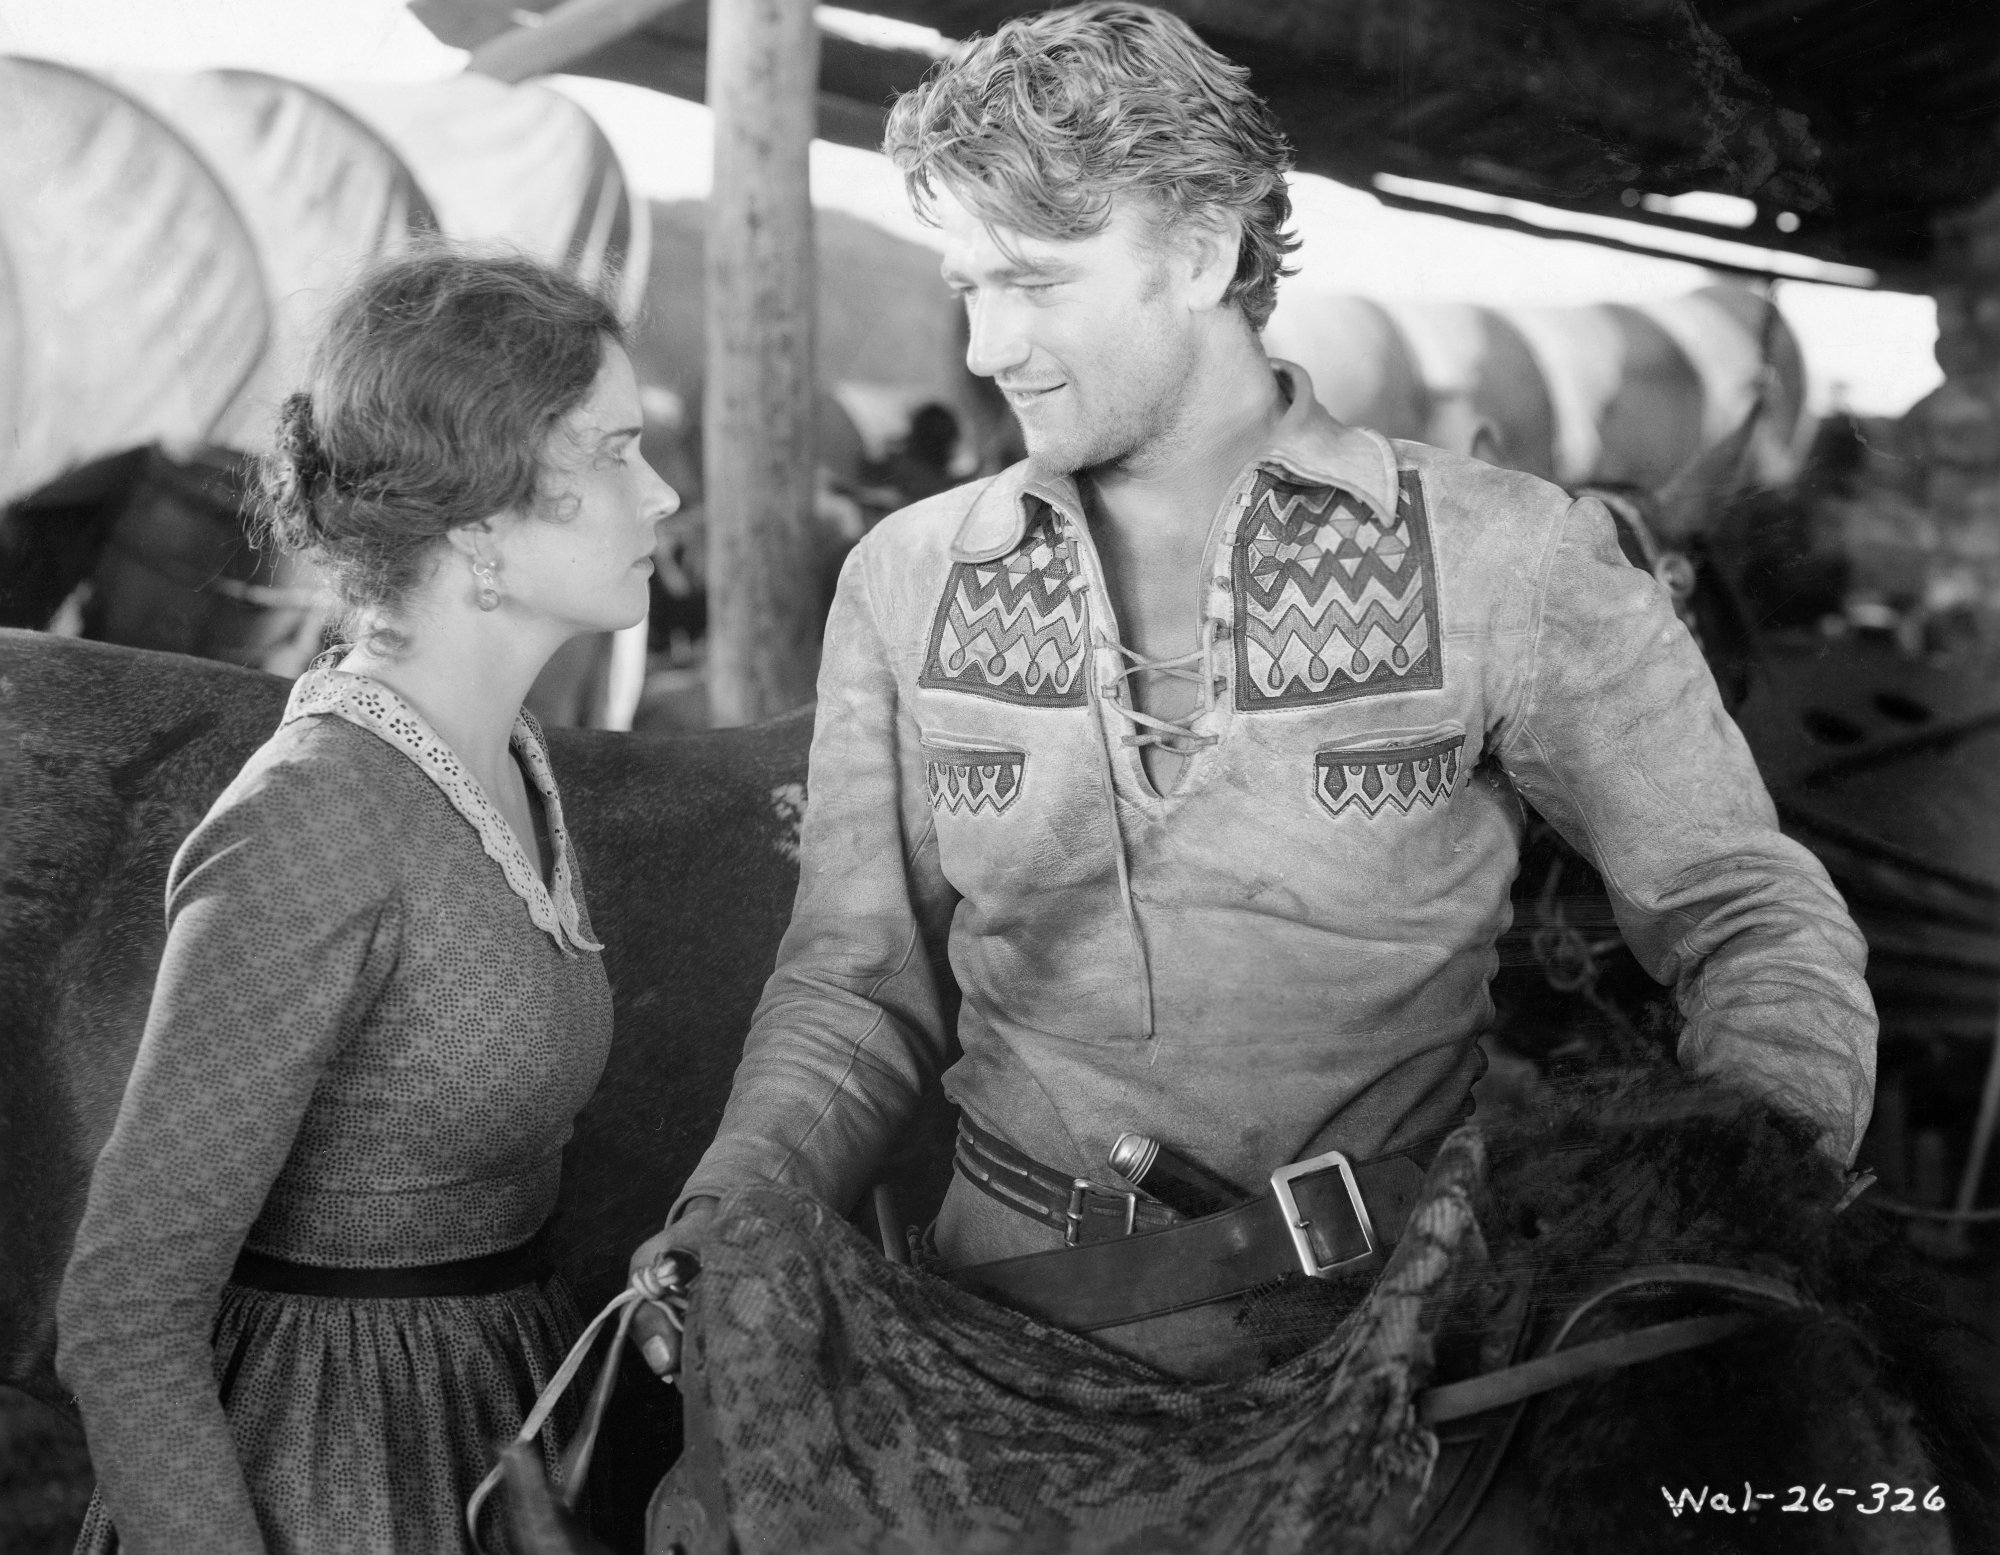 John Wayne as Breck Coleman and Marguerite Churchill as Ruth Cameron in one of his first movies 'The Big Trail' looking at each other with a horse behind them